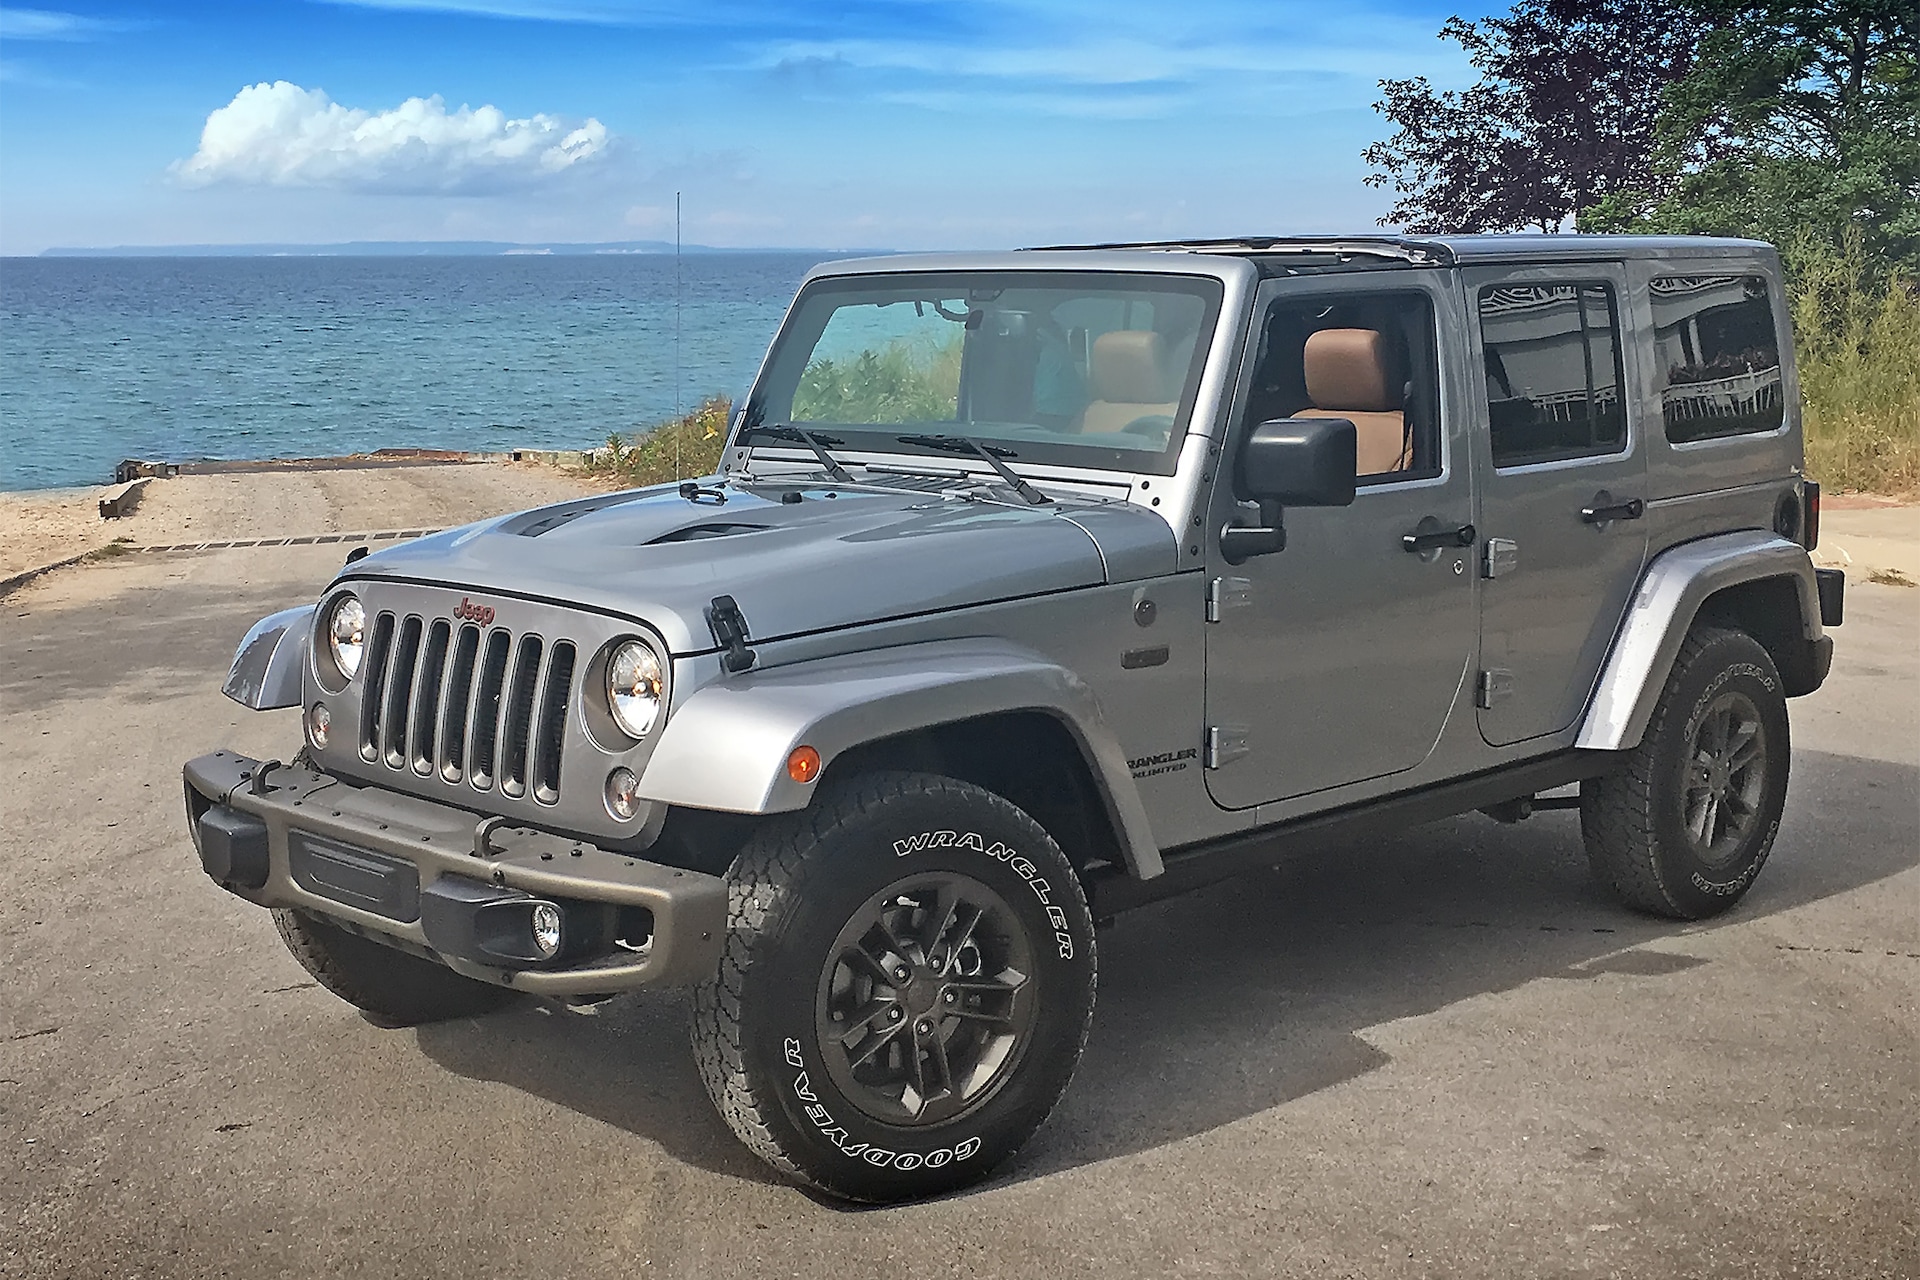 One Week With: 2016 Jeep Wrangler Unlimited 4x4 75th Edition